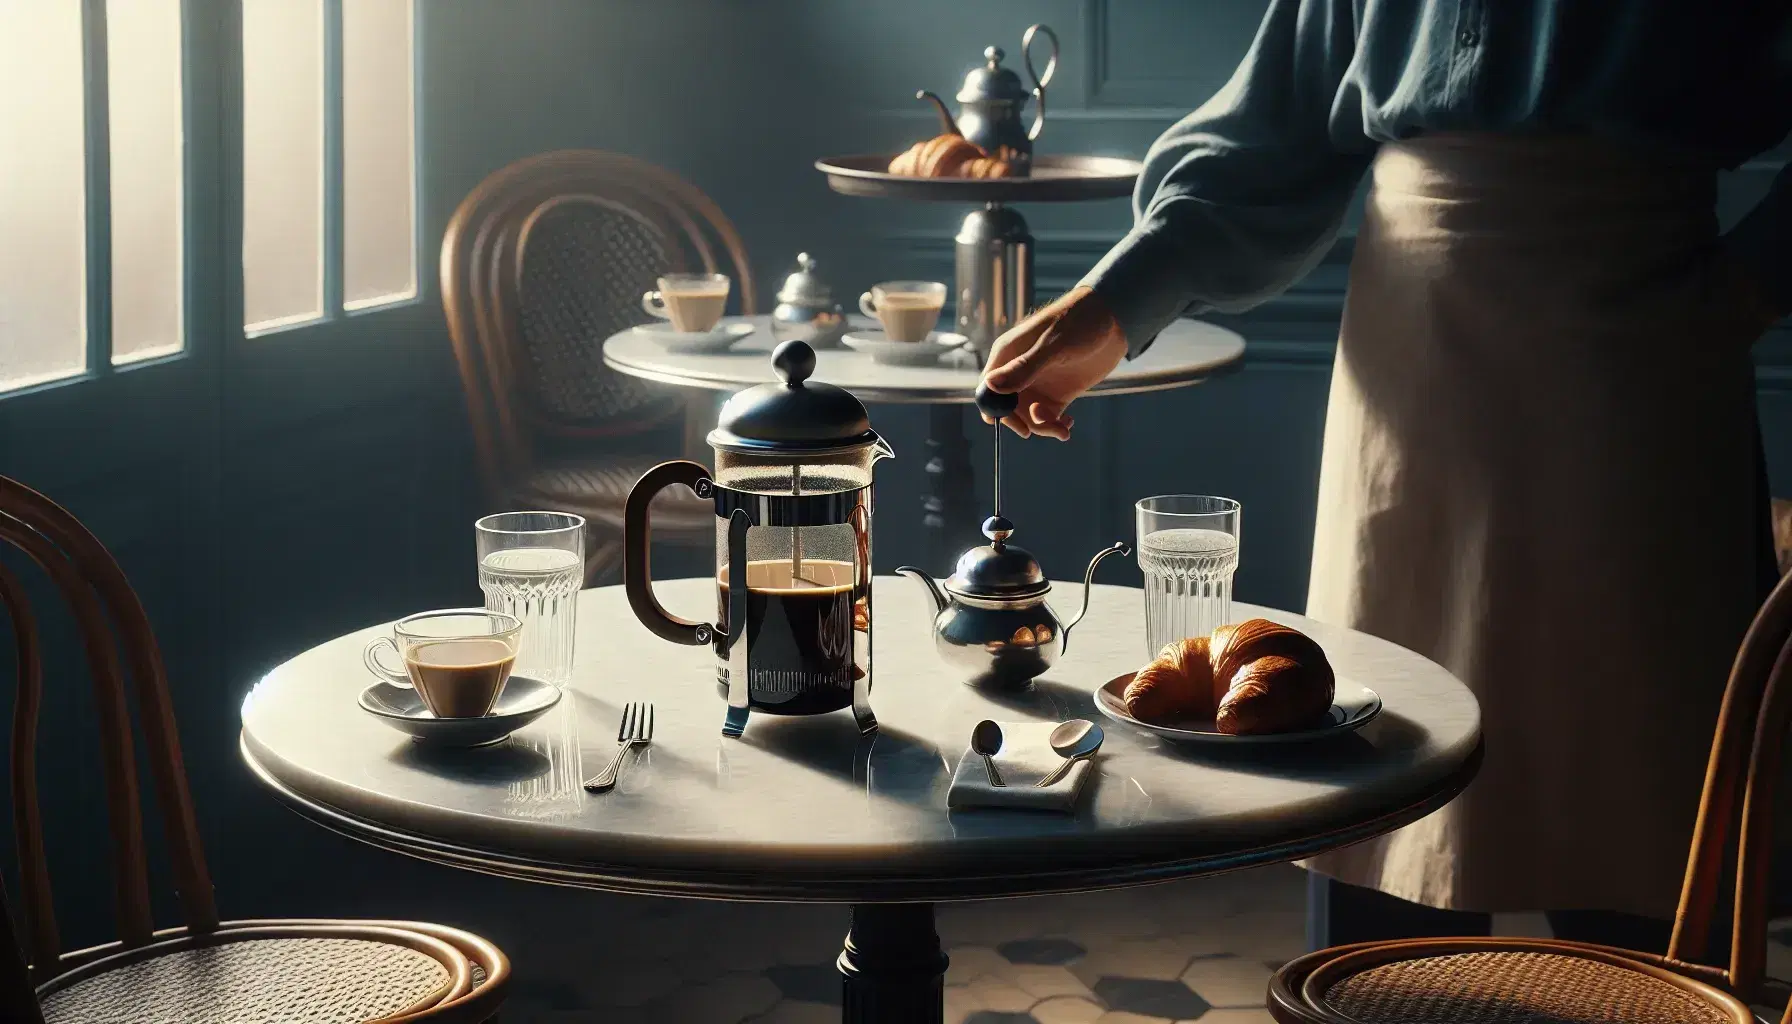 French café scene with a marble-topped table, a French press, two glass cups, a ceramic creamer, and a patron reaching for coffee.